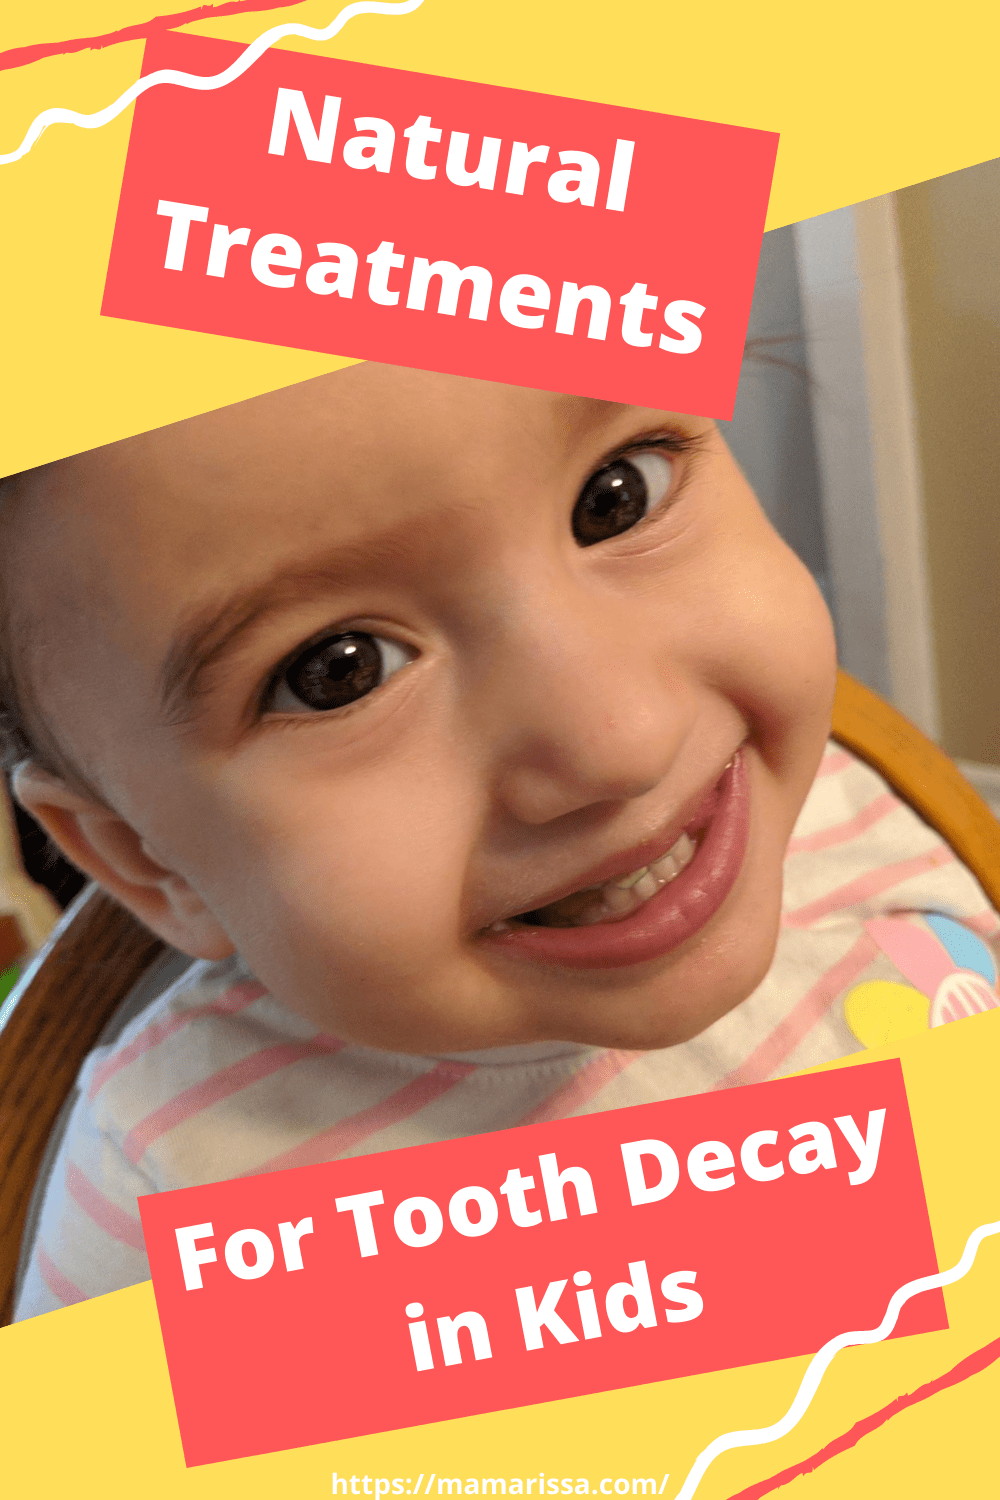 Natural Treatments for Tooth Decay in Kids